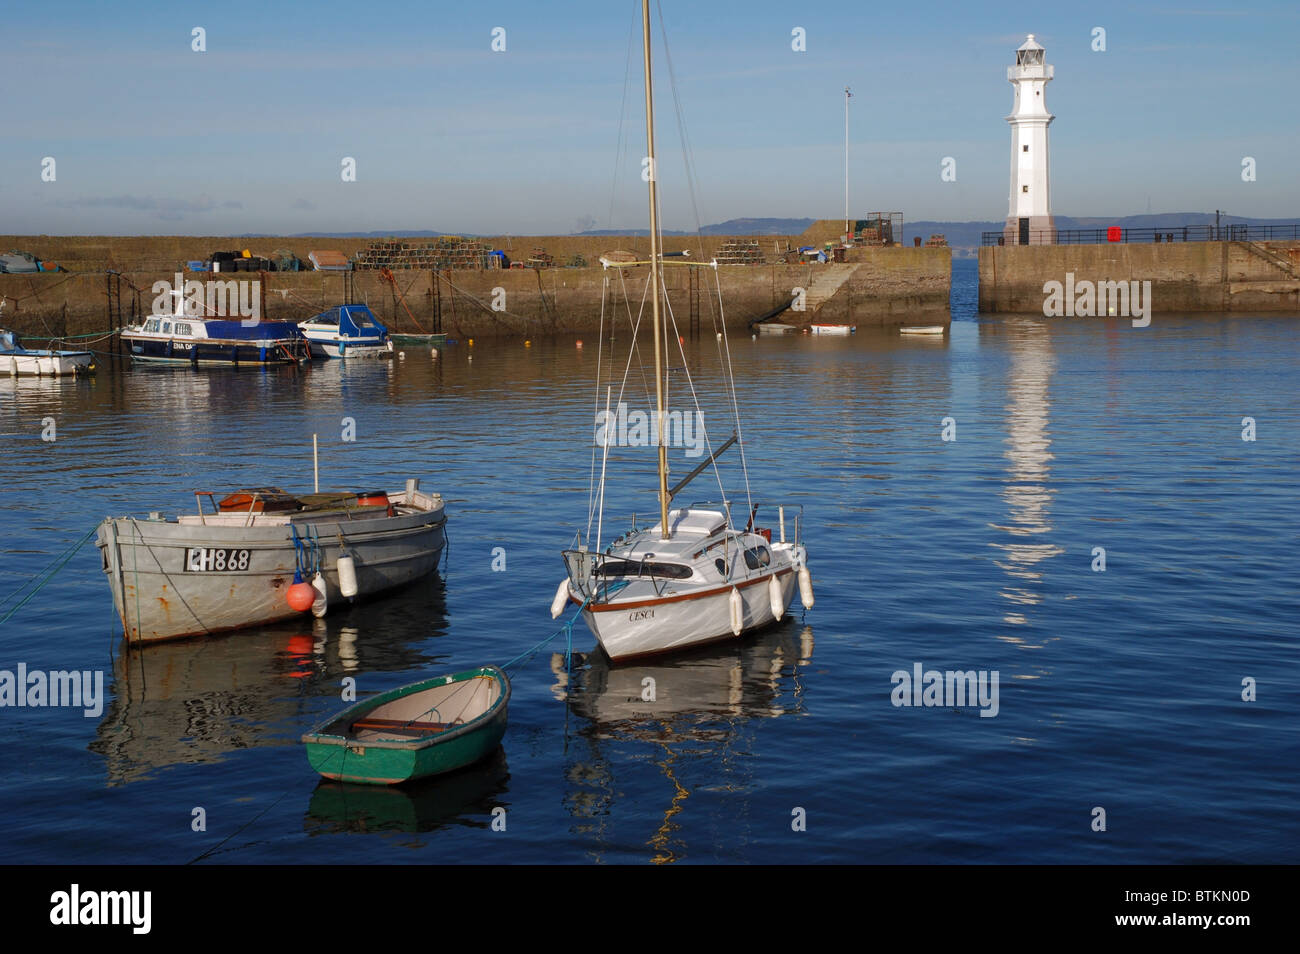 A quiet Sunday morning at Newhaven Harbour on the Firth of Firth in Edinburgh Scotland, UK. Stock Photo